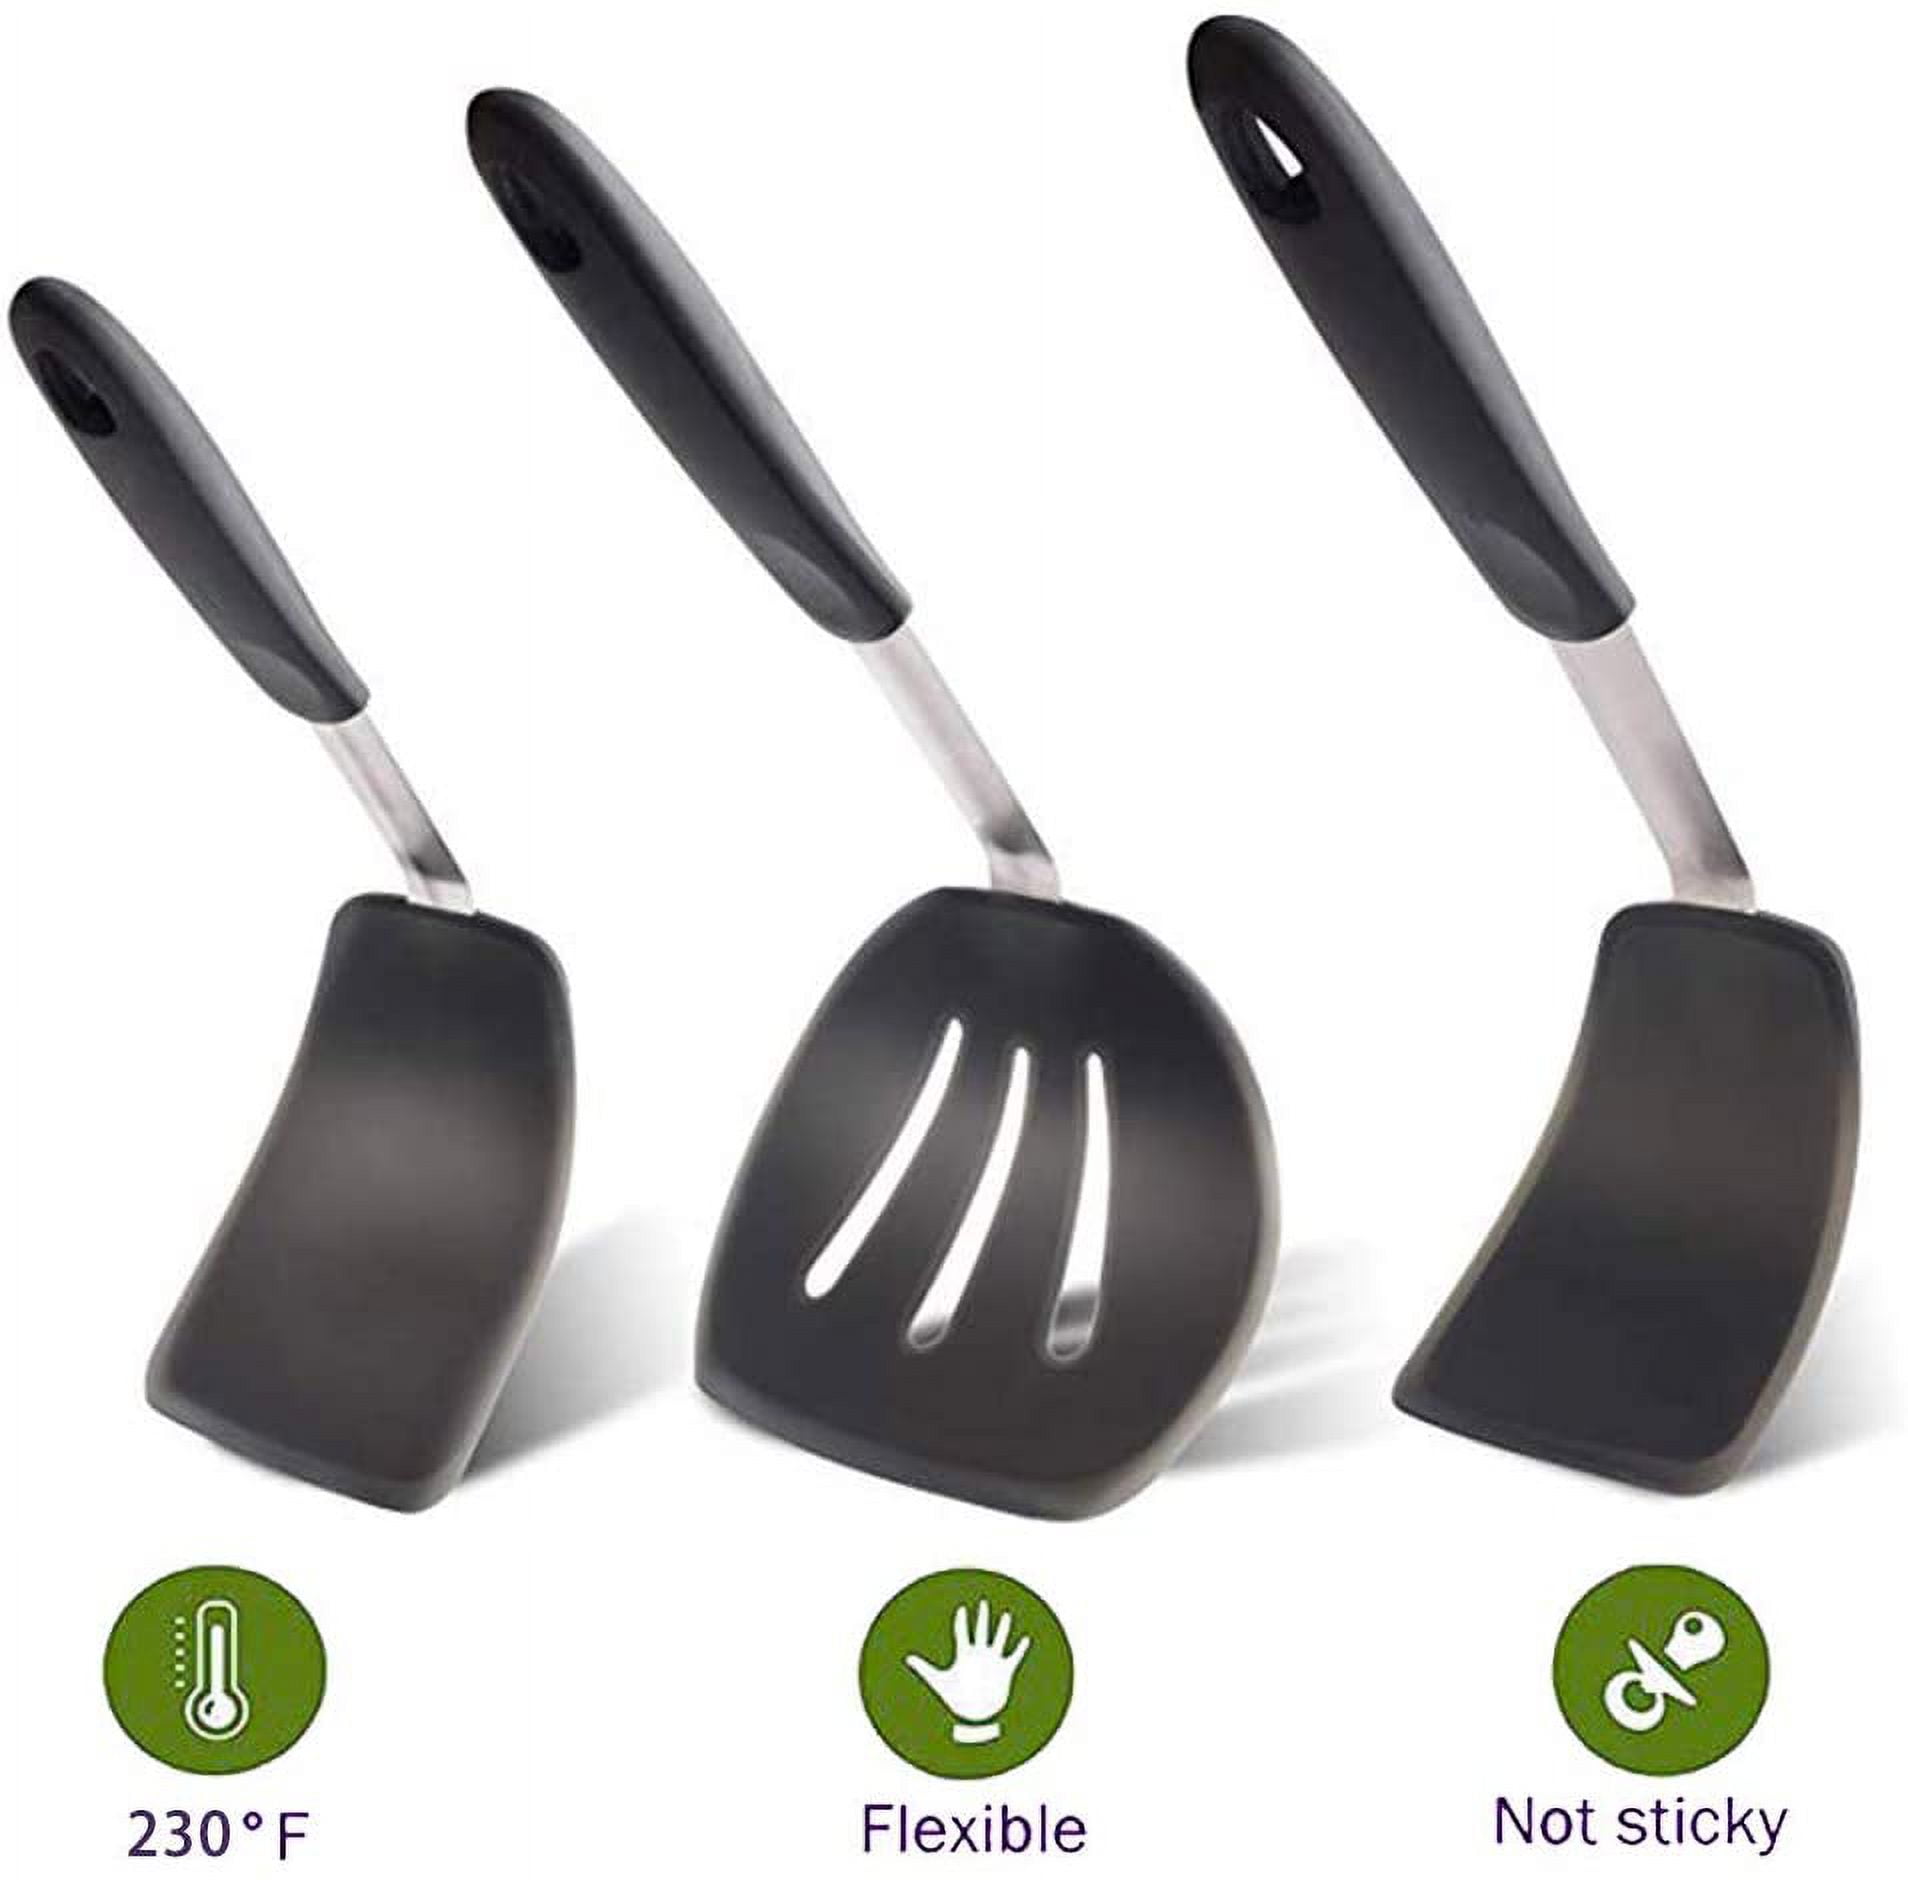 Tongjude Silicone Spurtle Set, Silicone Spatula Set, Heat Resistant Cooking  Utensil for Nonstick Coo…See more Tongjude Silicone Spurtle Set, Silicone